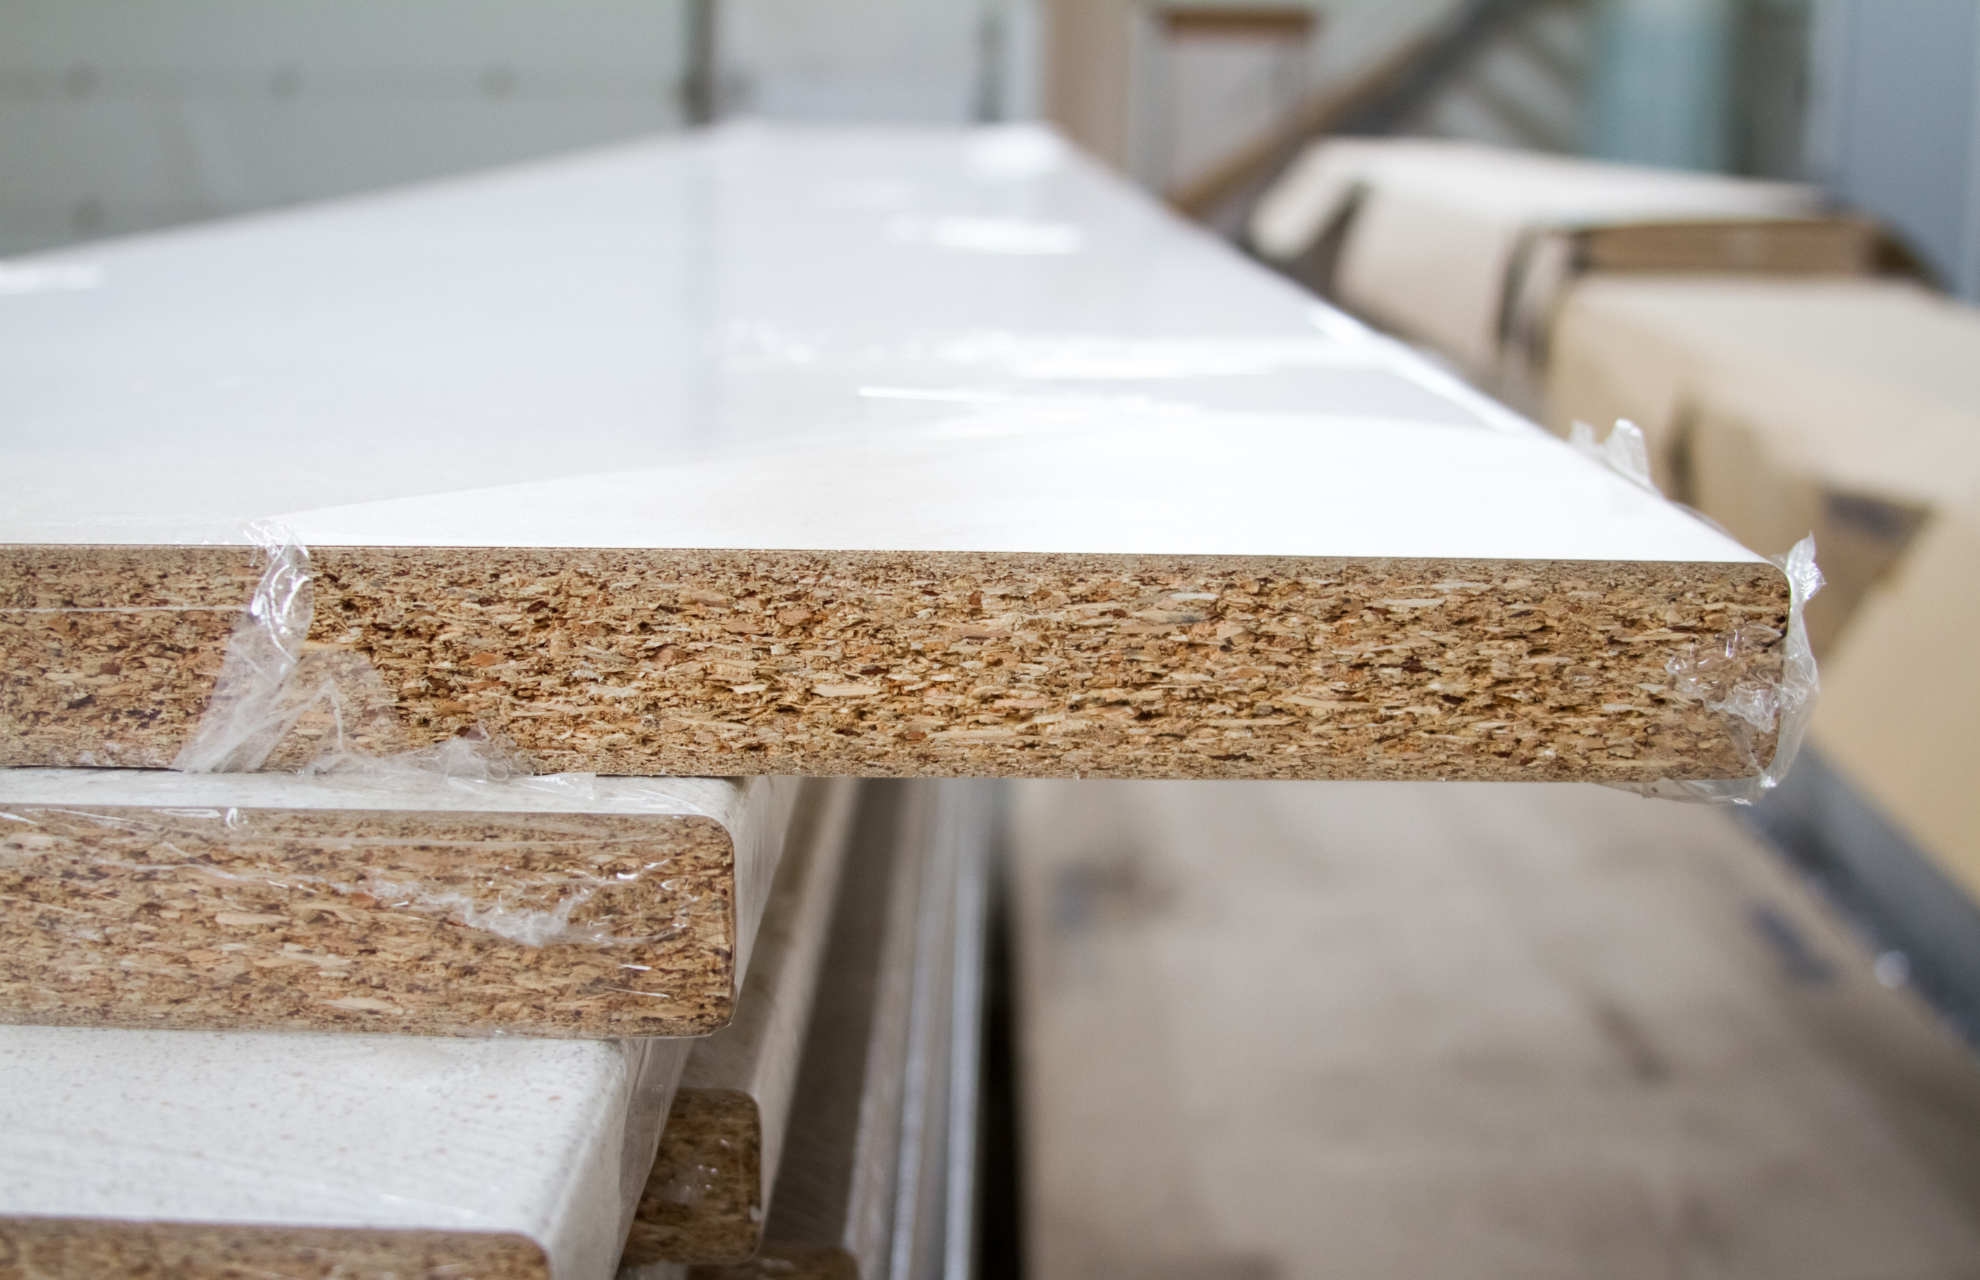 Particleboard stored inside a ripped plastic